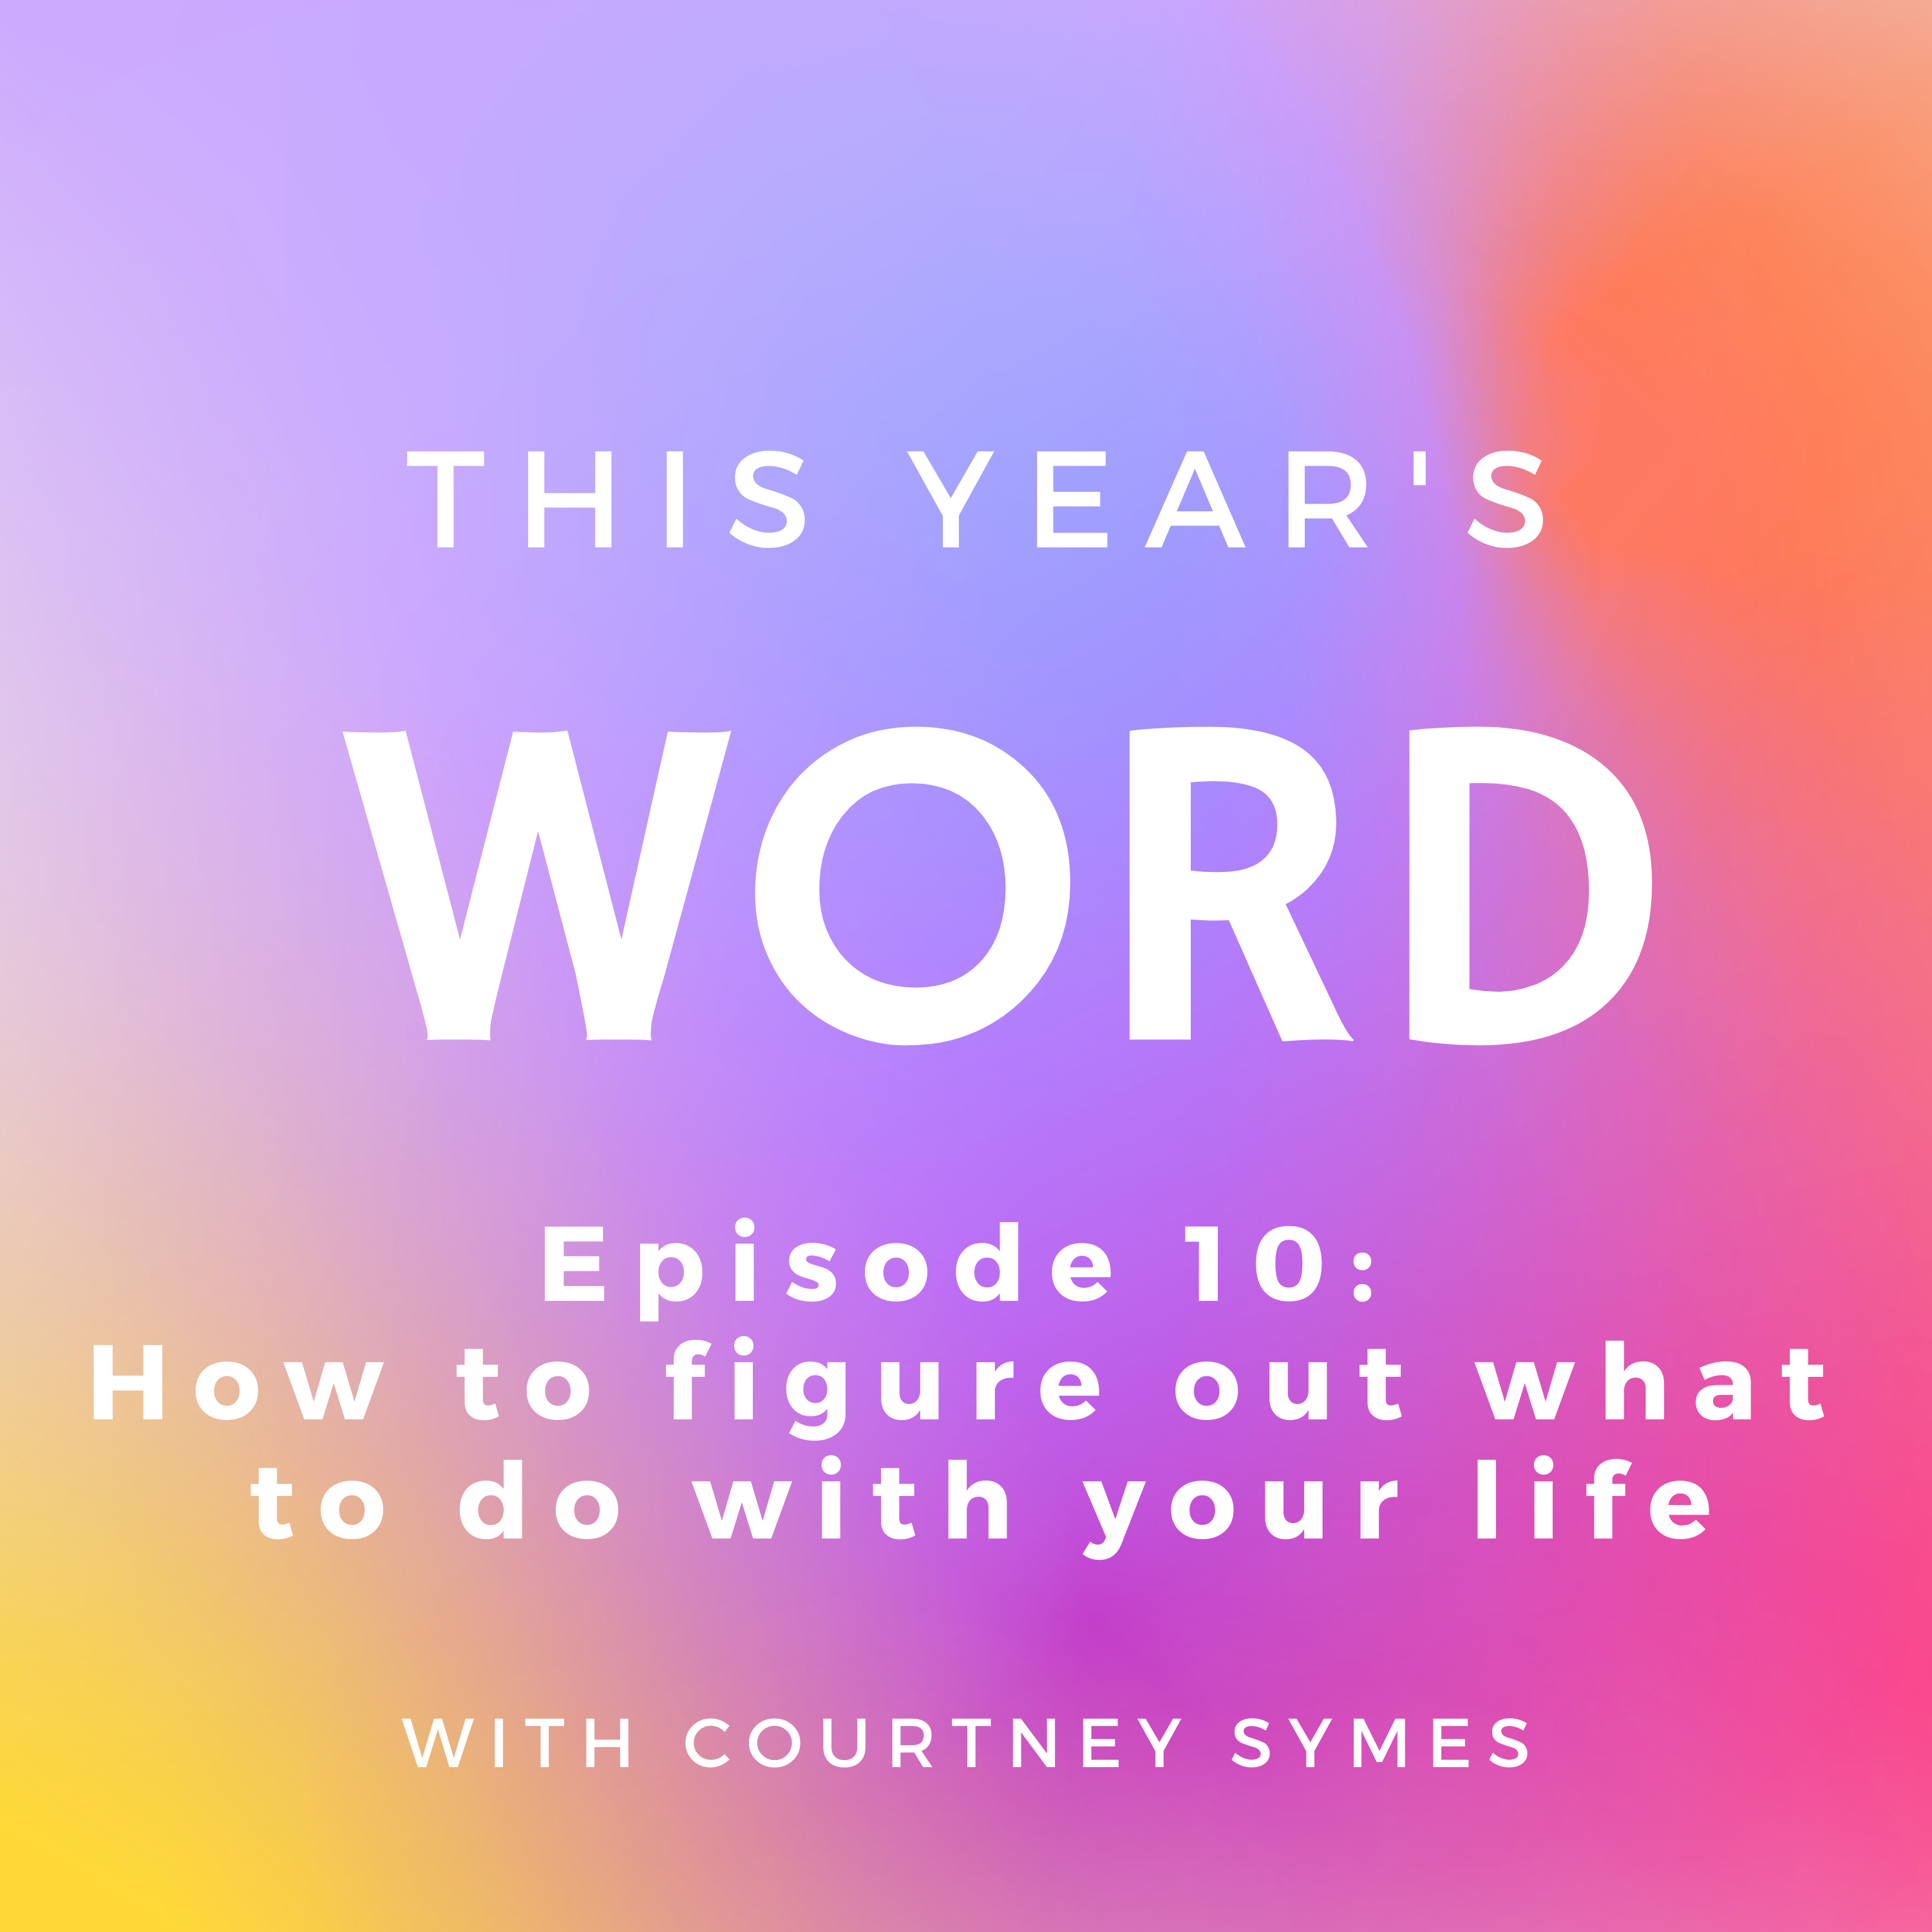 This Year’s Word Podcast Shownotes: Episode 10, How to figure out what to do with your life